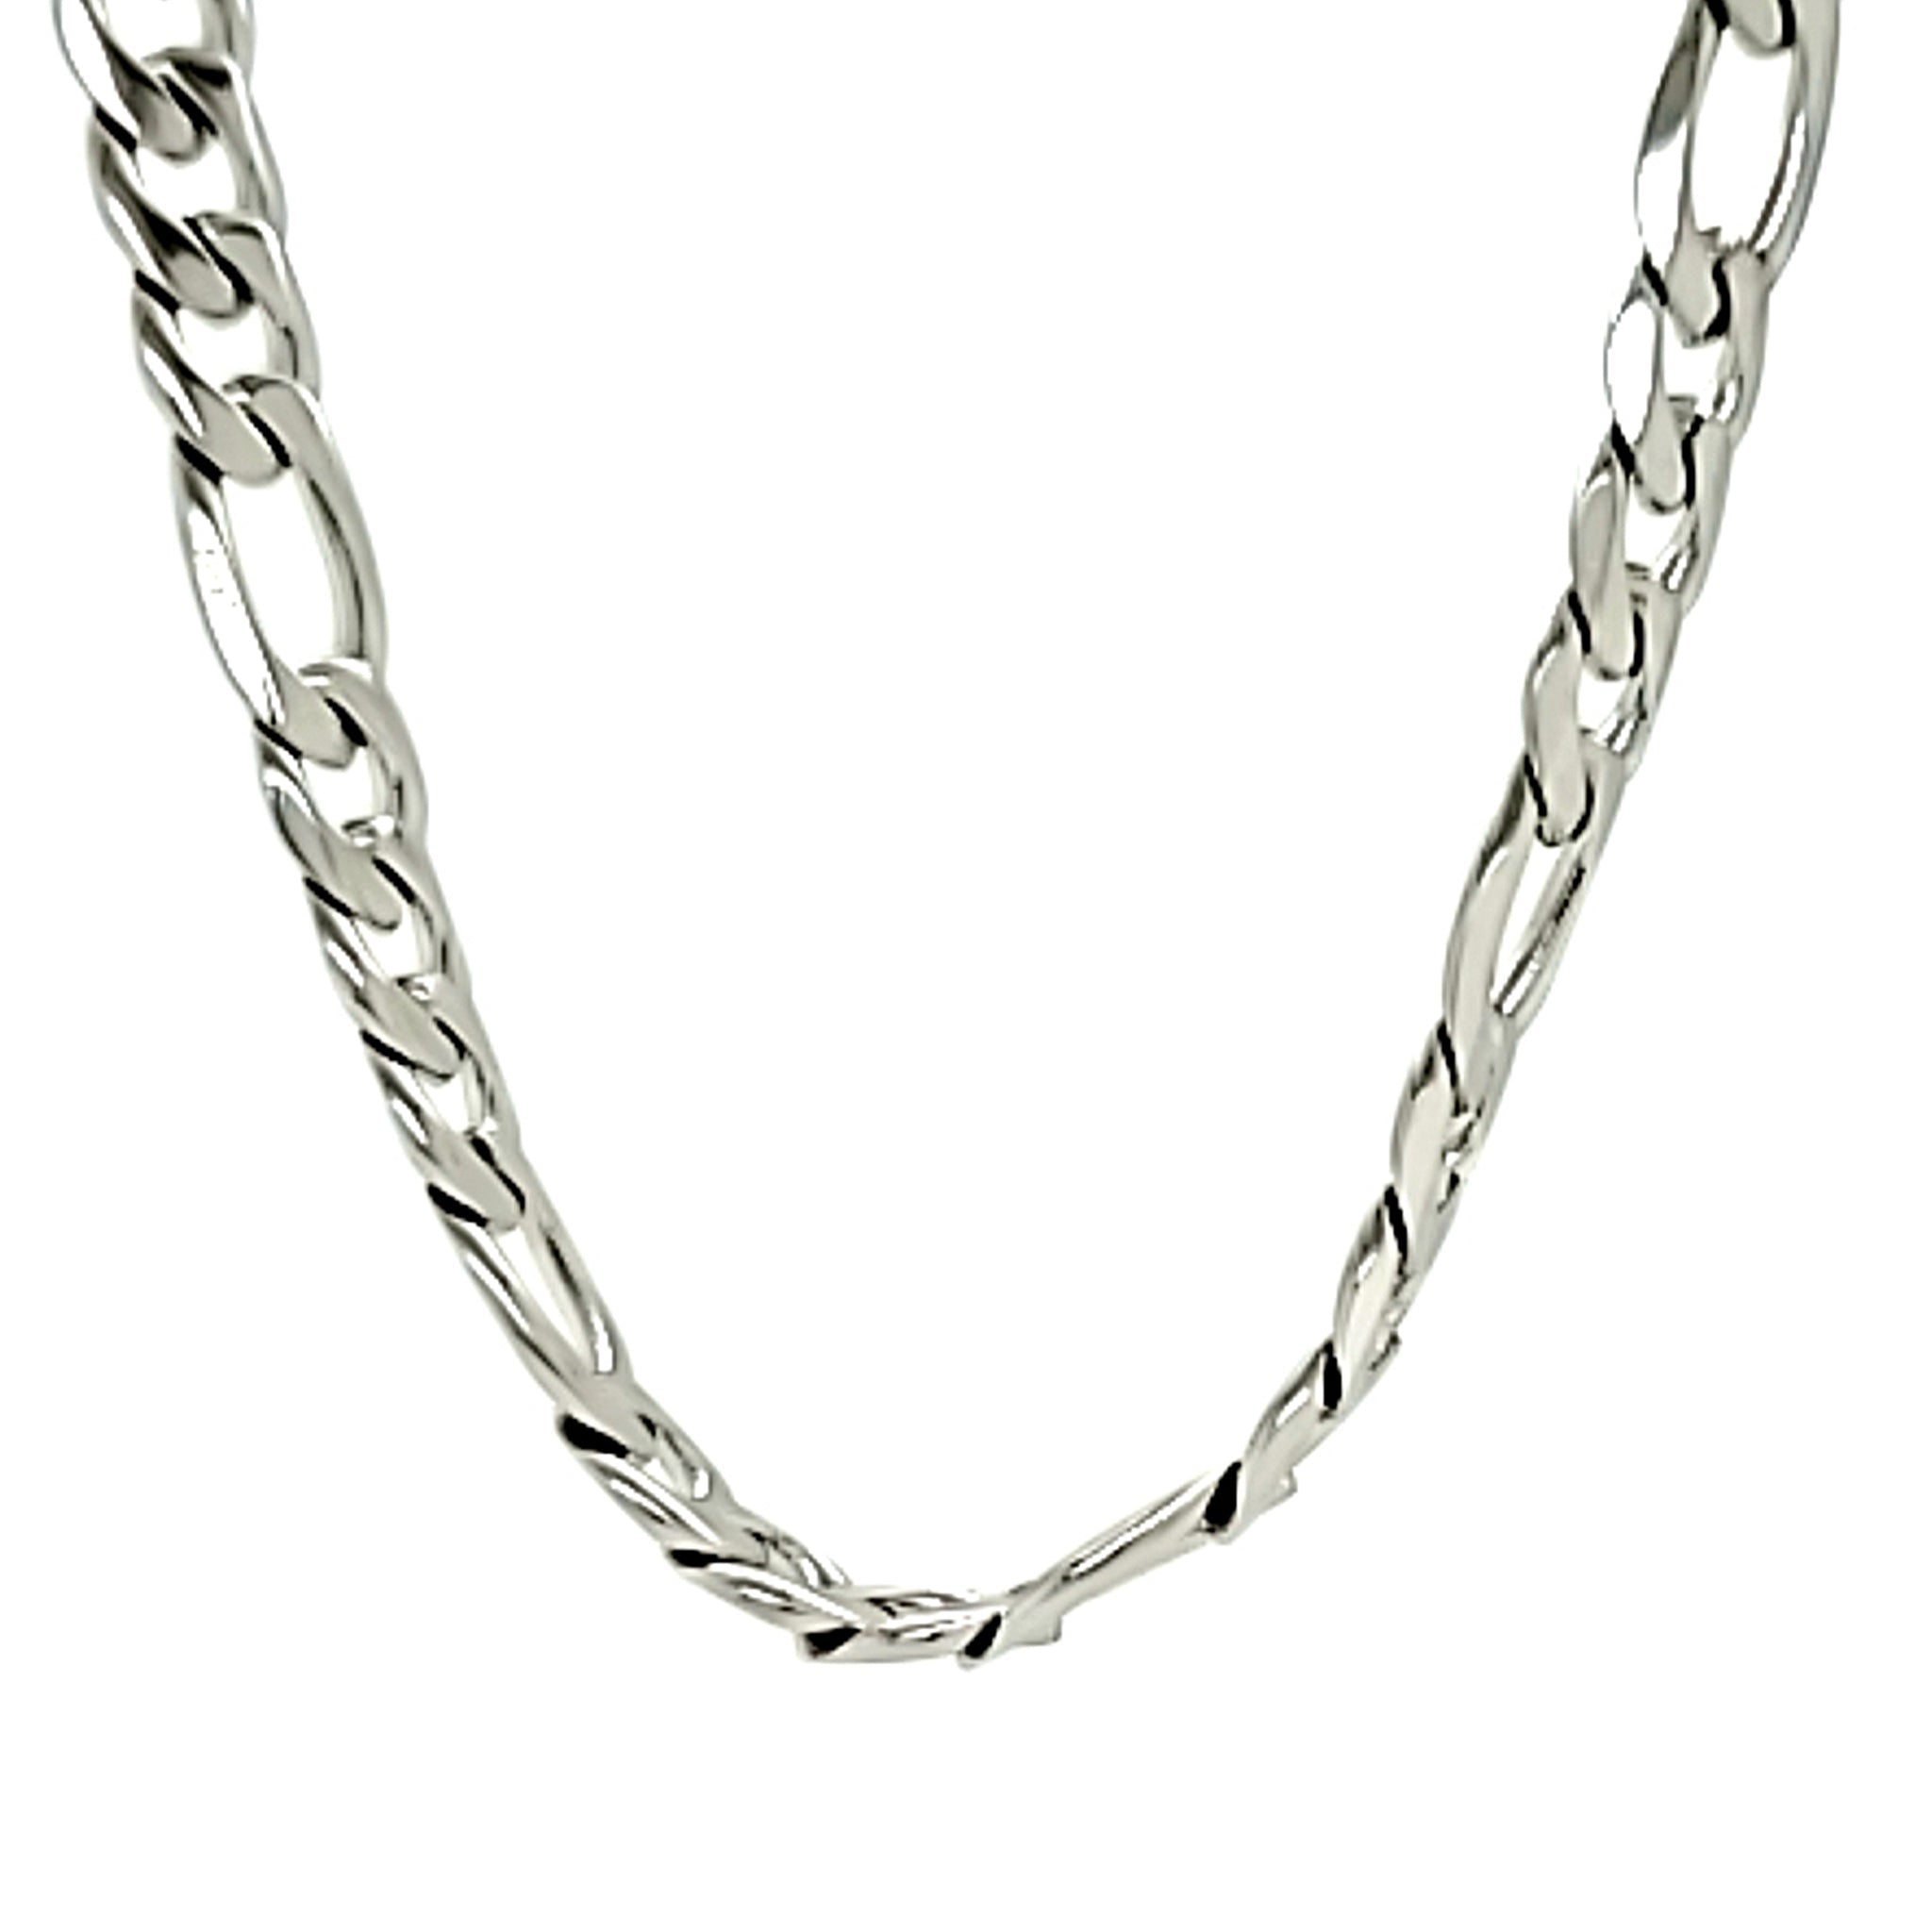 Stainless Steel Figaro Chain Necklace - Timeless Design, Hypoallergenic, Rust-Proof - 8g, 12mm-9mm - Online Store - Jewelry & Watches - Bijou Her -  -  - 